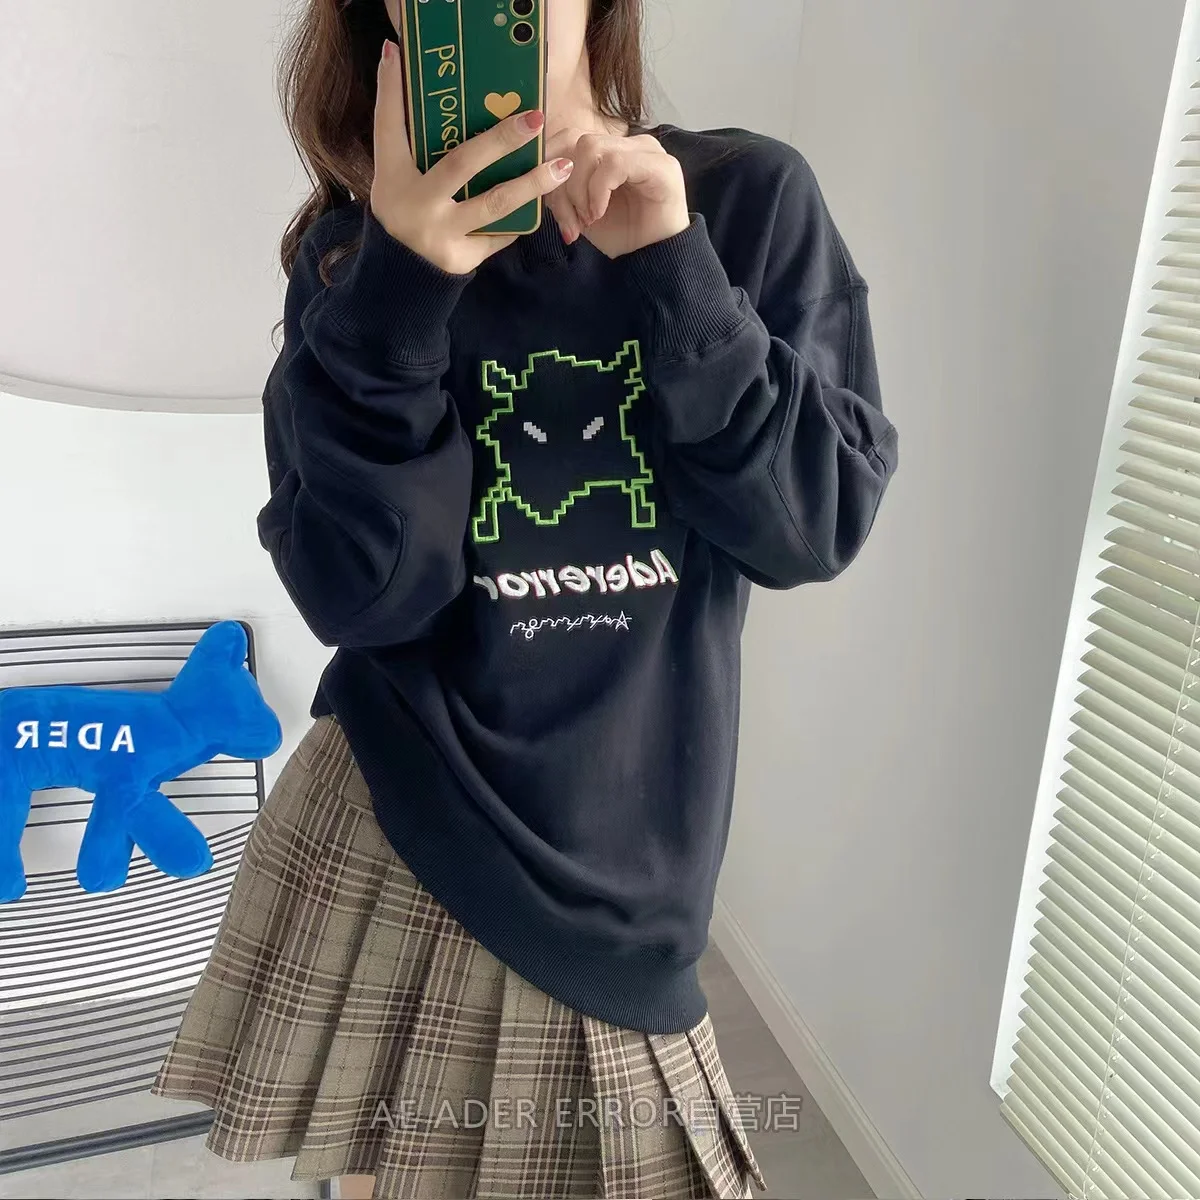 ADER ERROR high-quality sweater small monster embroidery loose casual all-match men and women couples long-sleeved oversized top